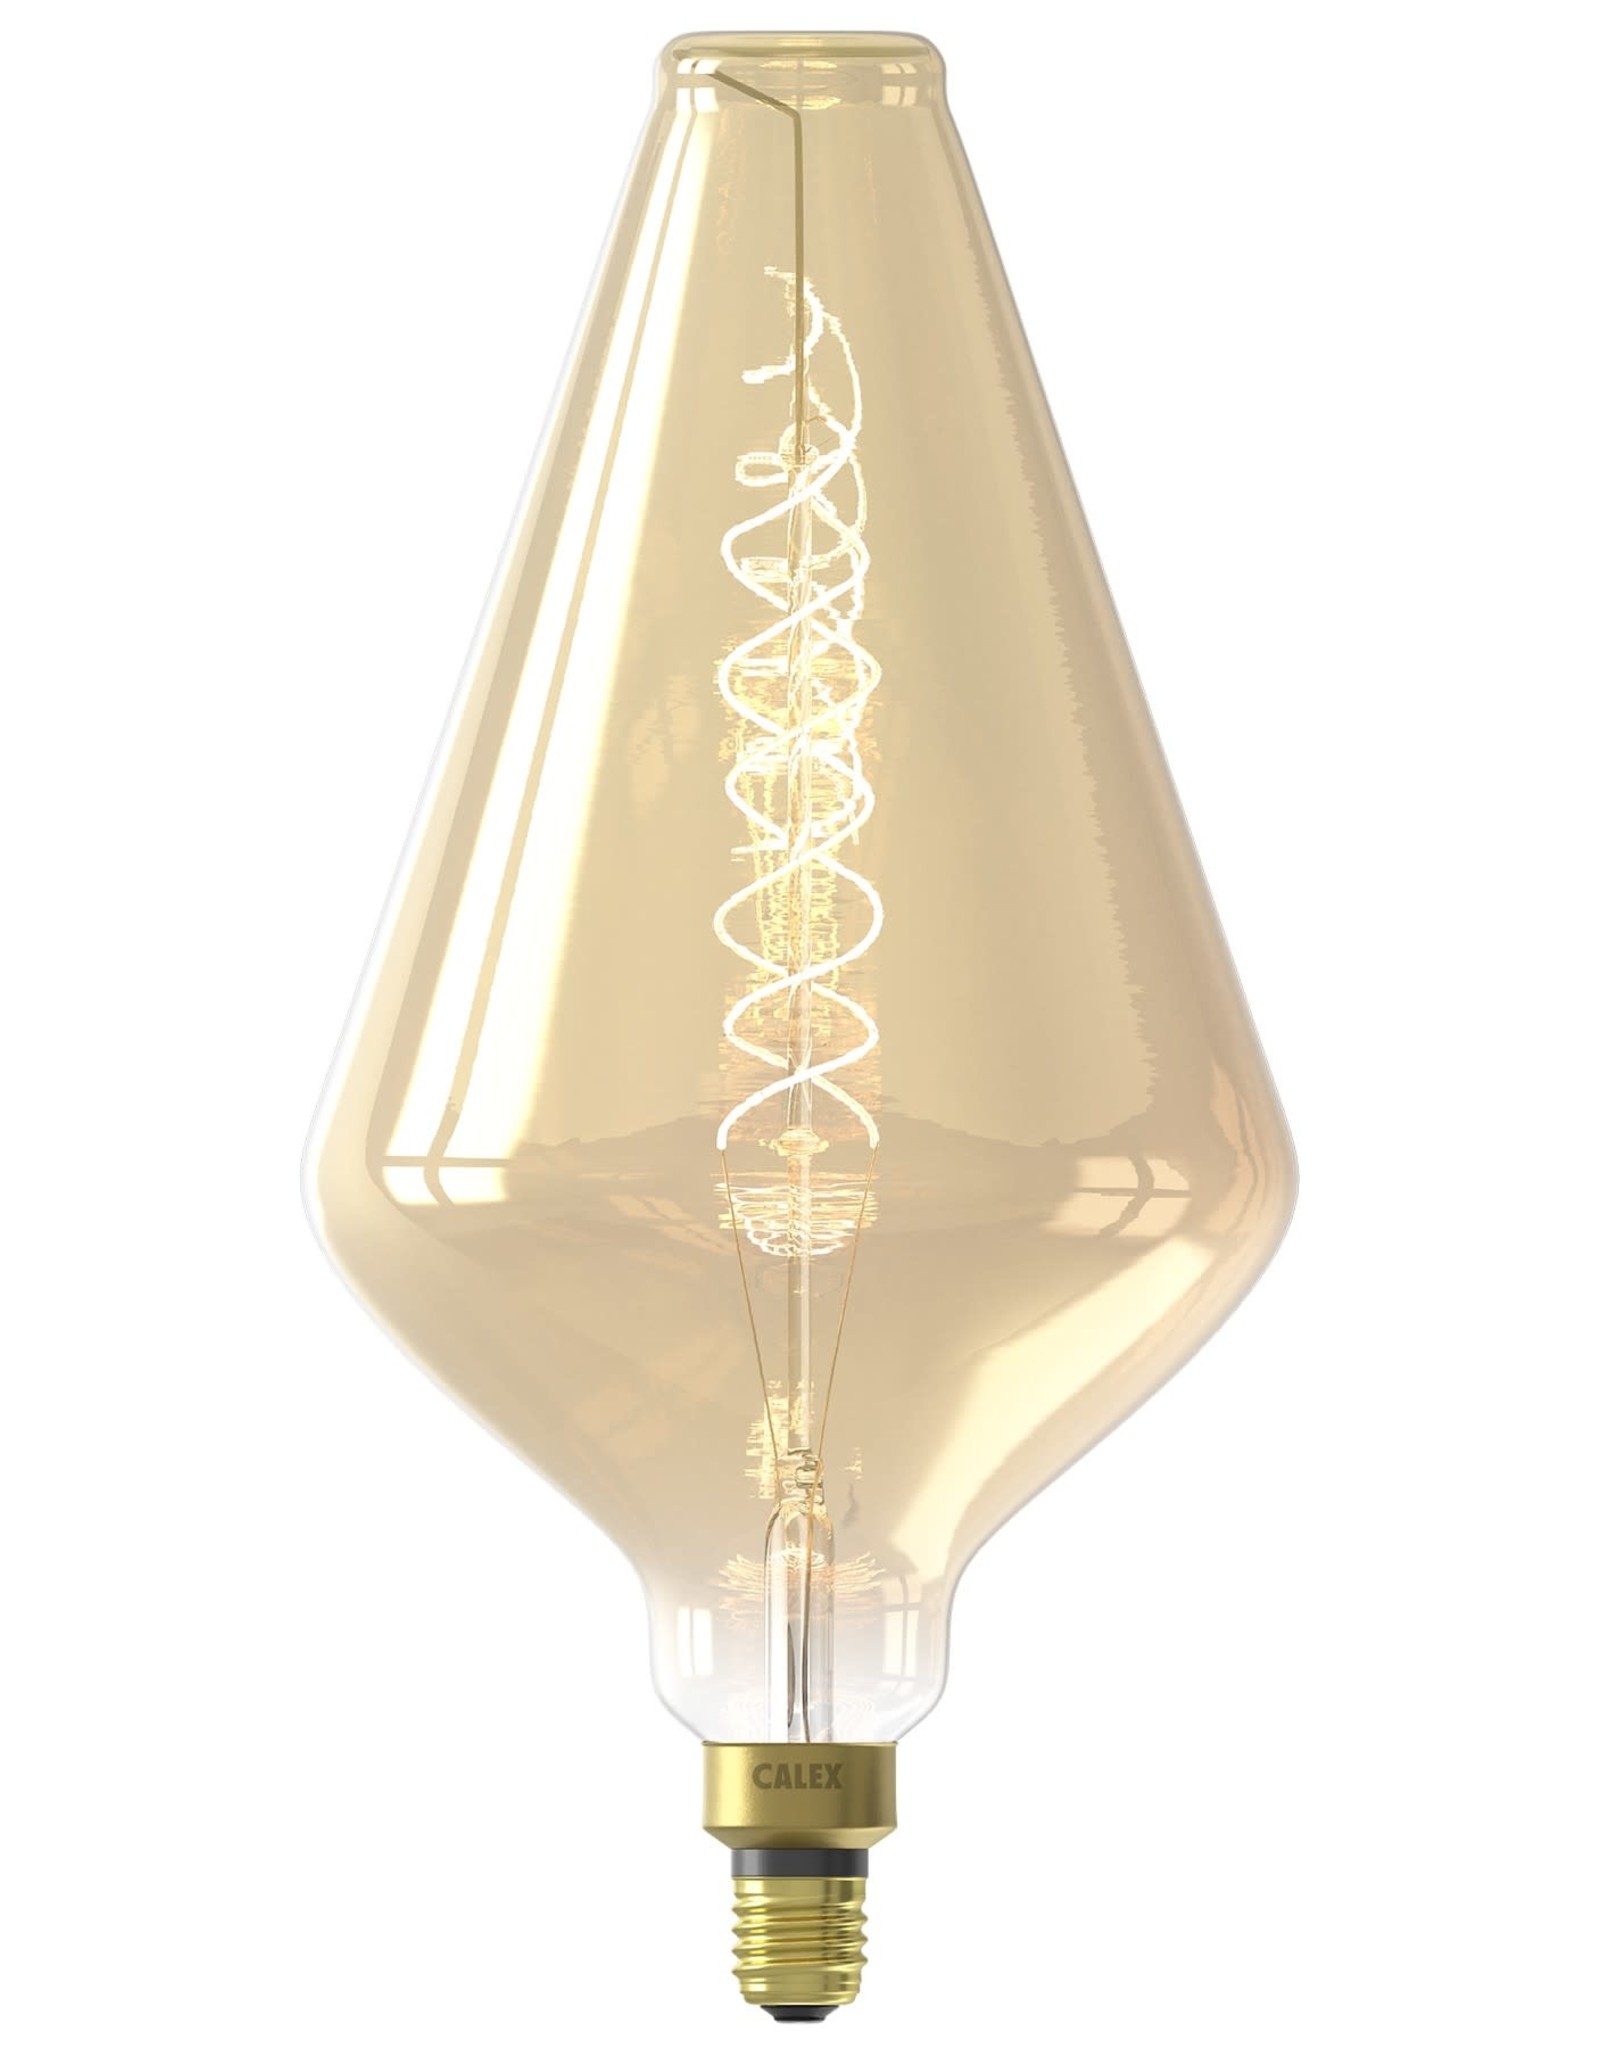 Calex XXL Vienna LED Lamp 220-240V 6W 300lm E27 VA188, Gold 2200K dimmable, energy label A